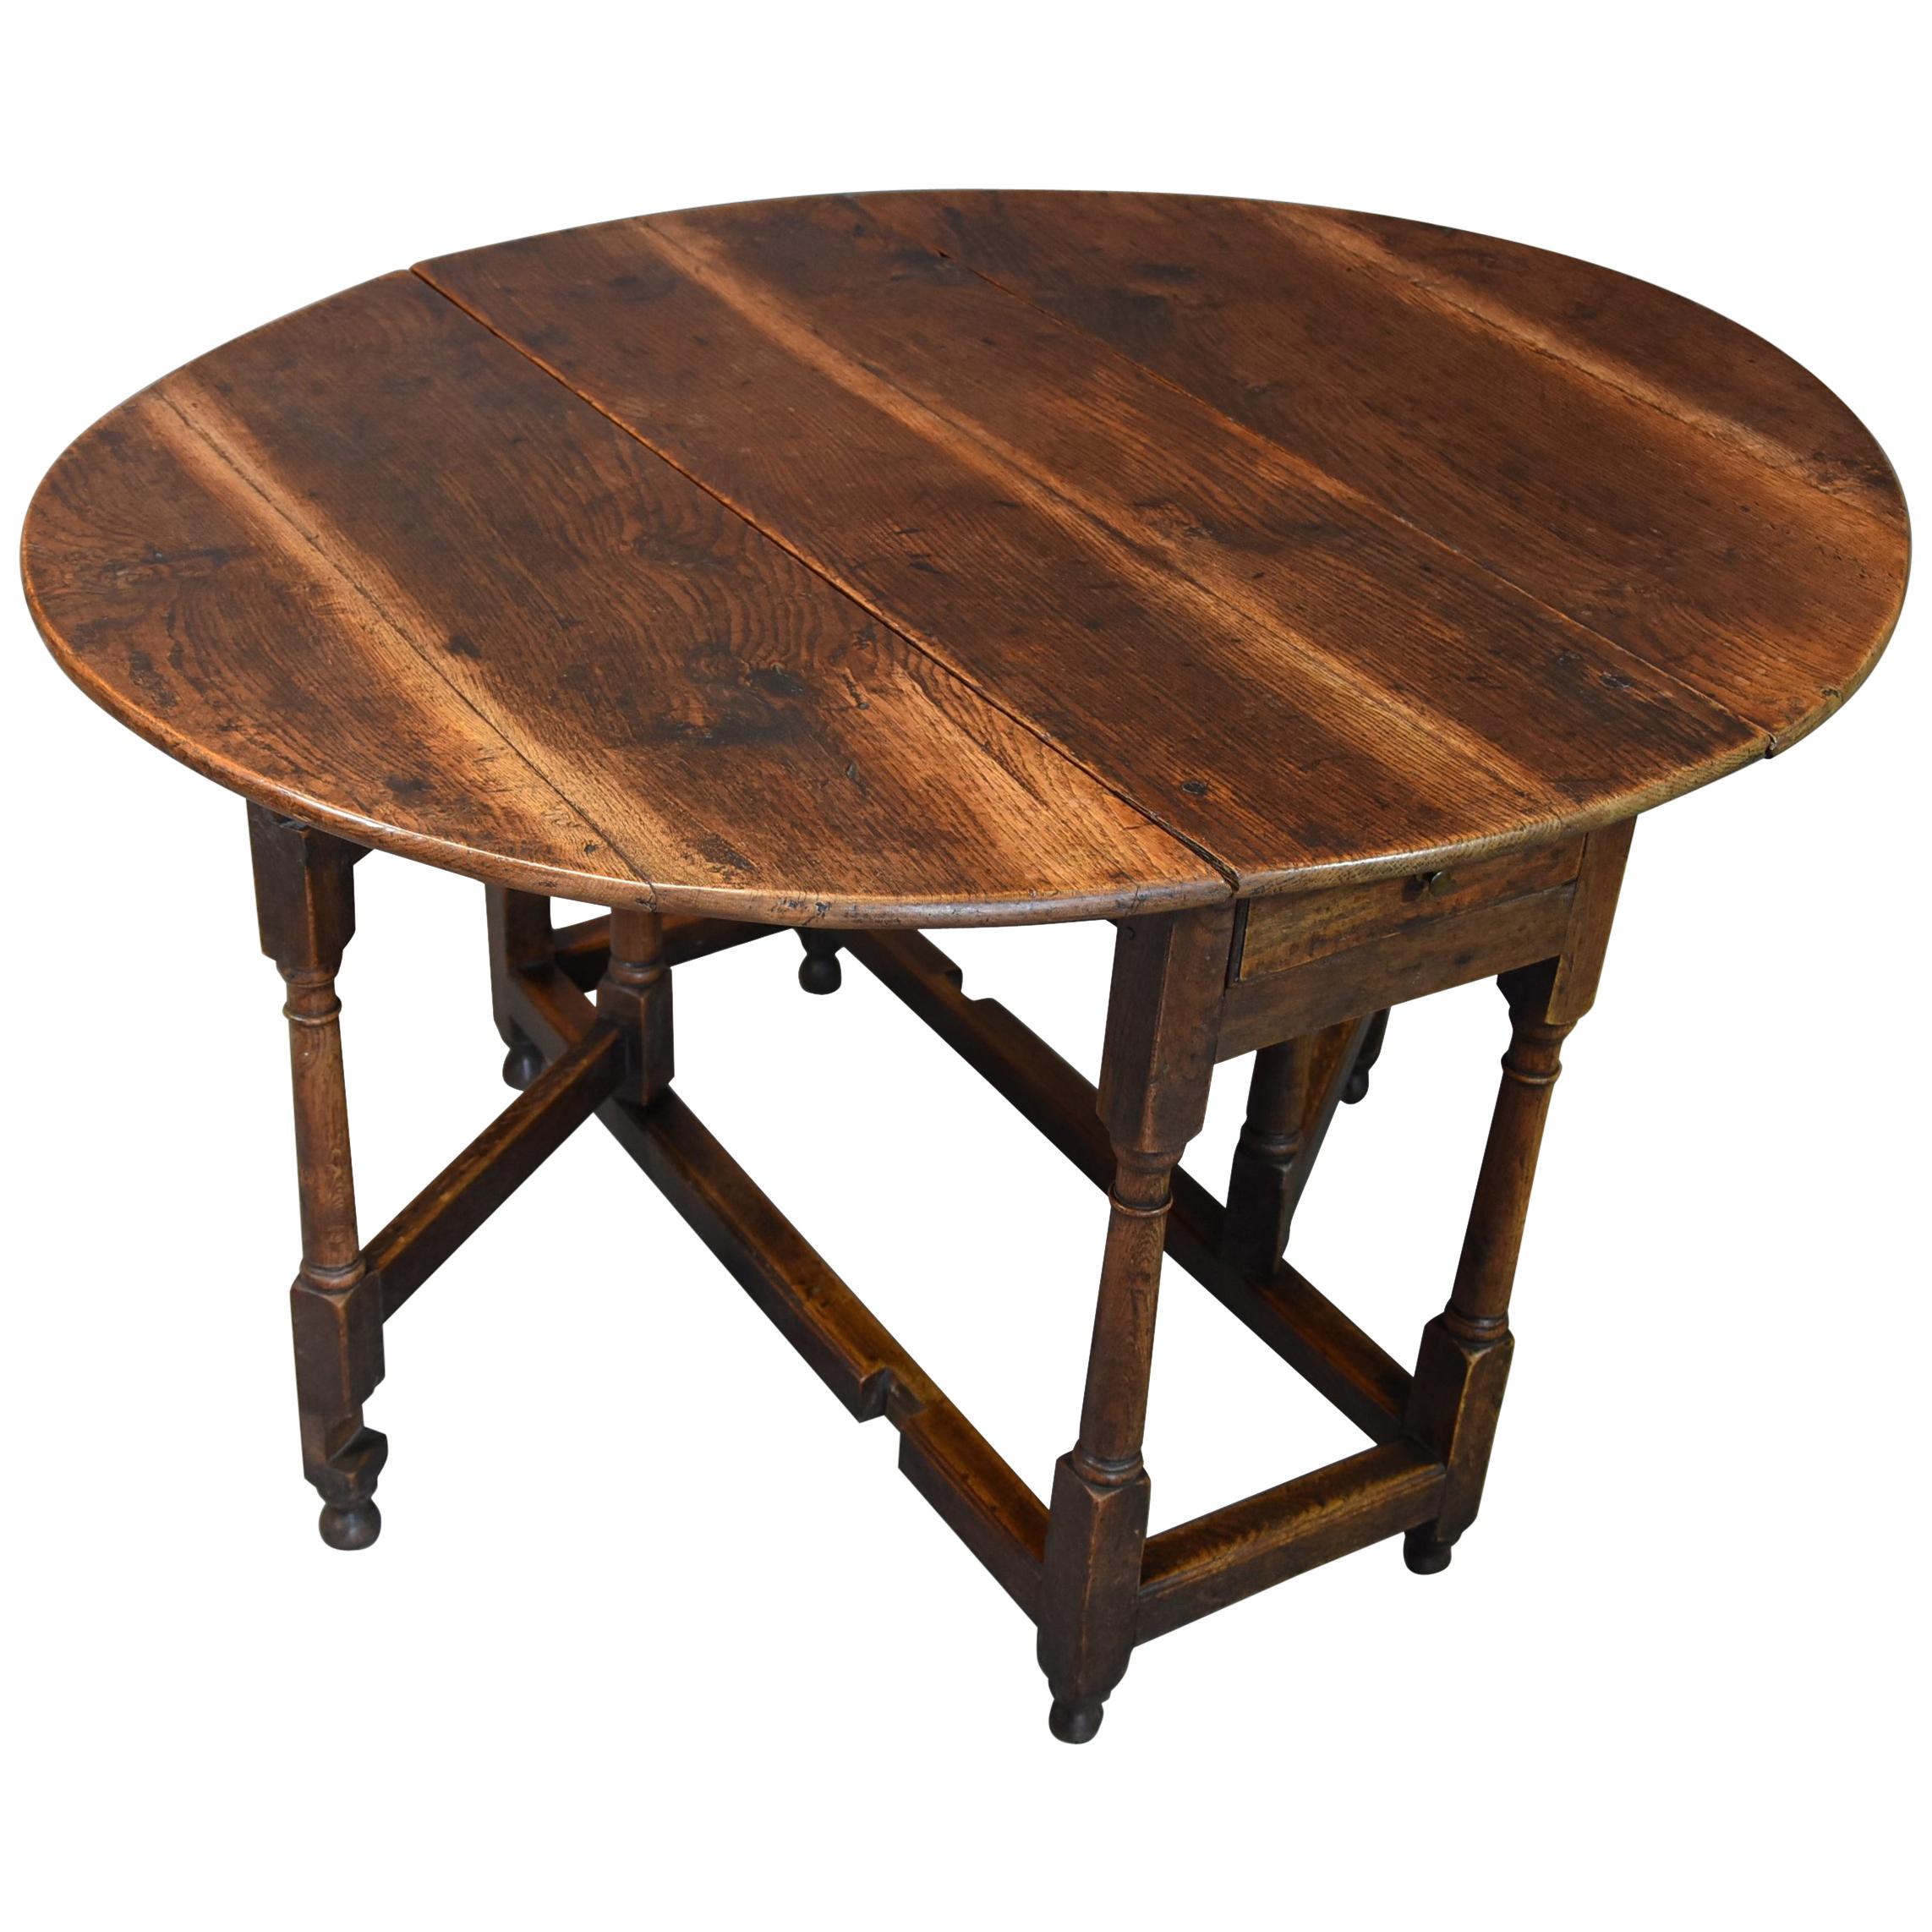 English Early 18th Century Oak Gateleg Table with Superb Original Patina For Sale